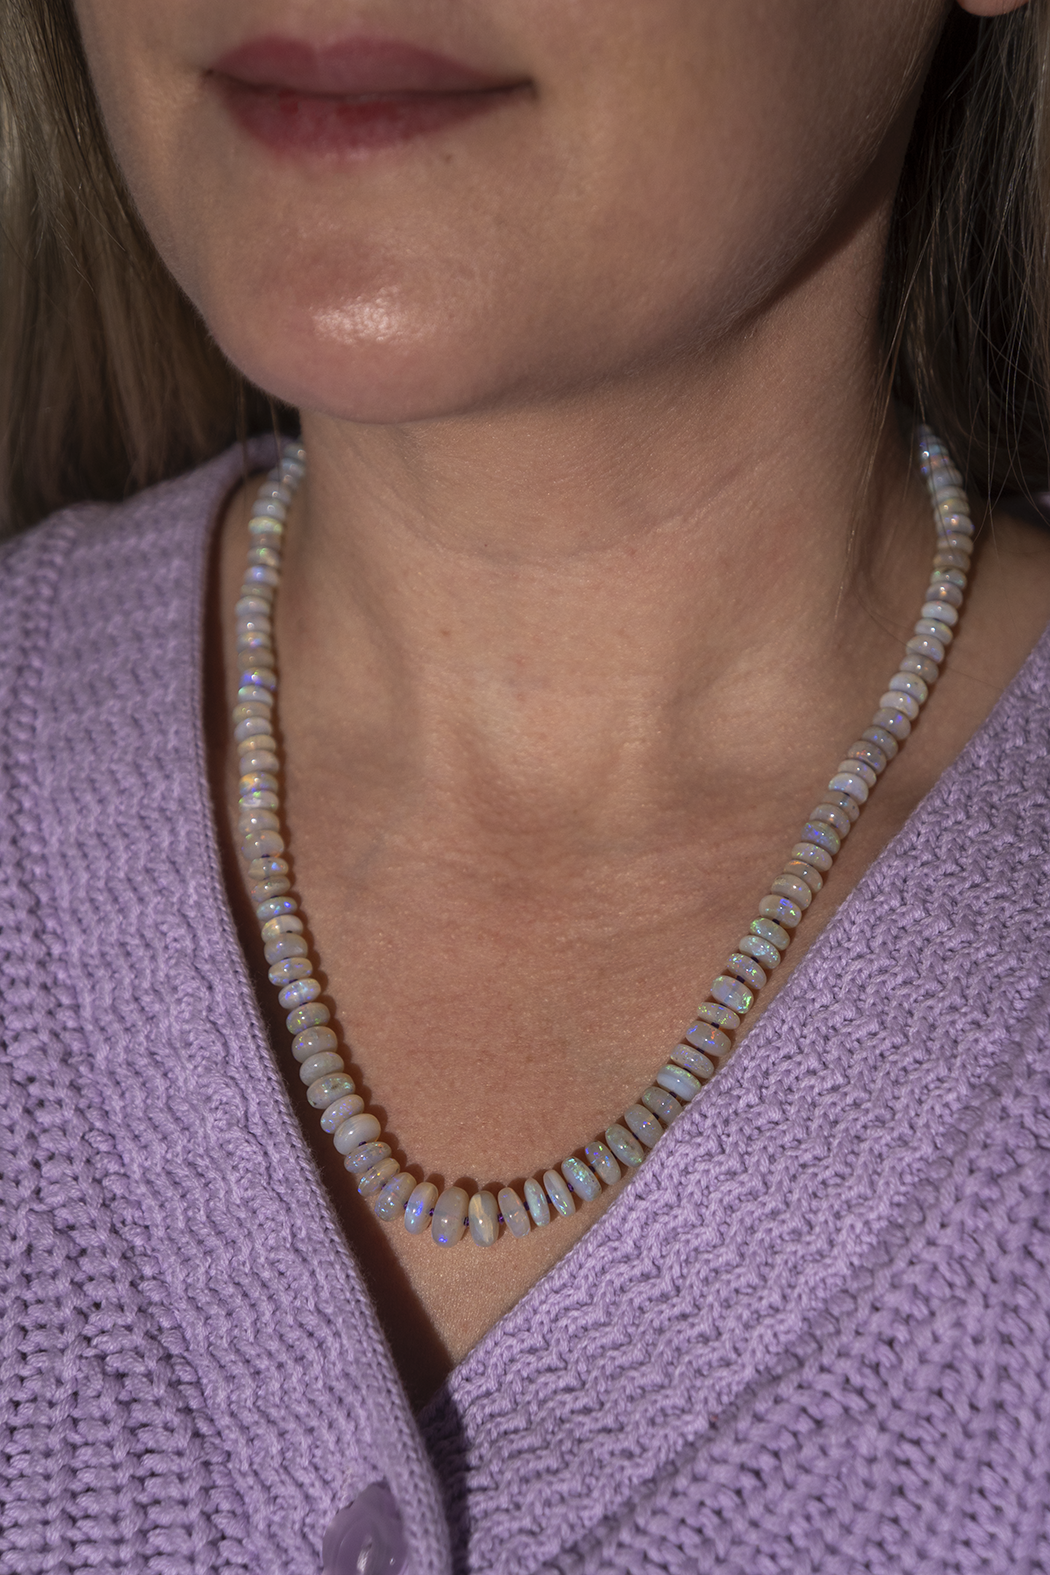 Australian Opal Knotted Bead Necklace 14k